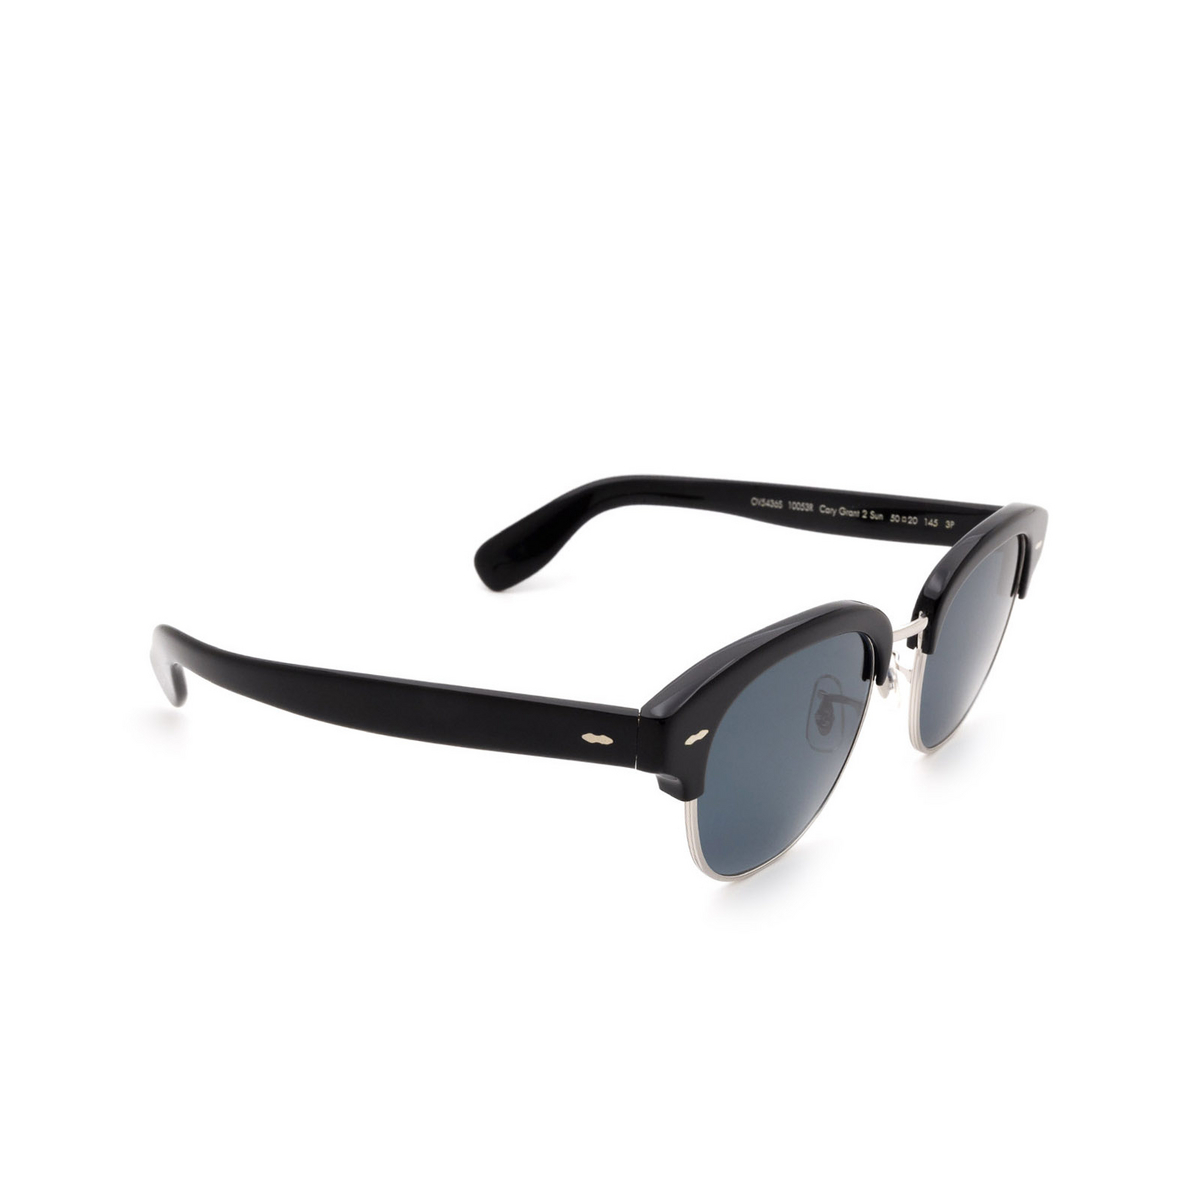 Oliver Peoples CARY GRANT 2 Sunglasses 10053R Black - three-quarters view